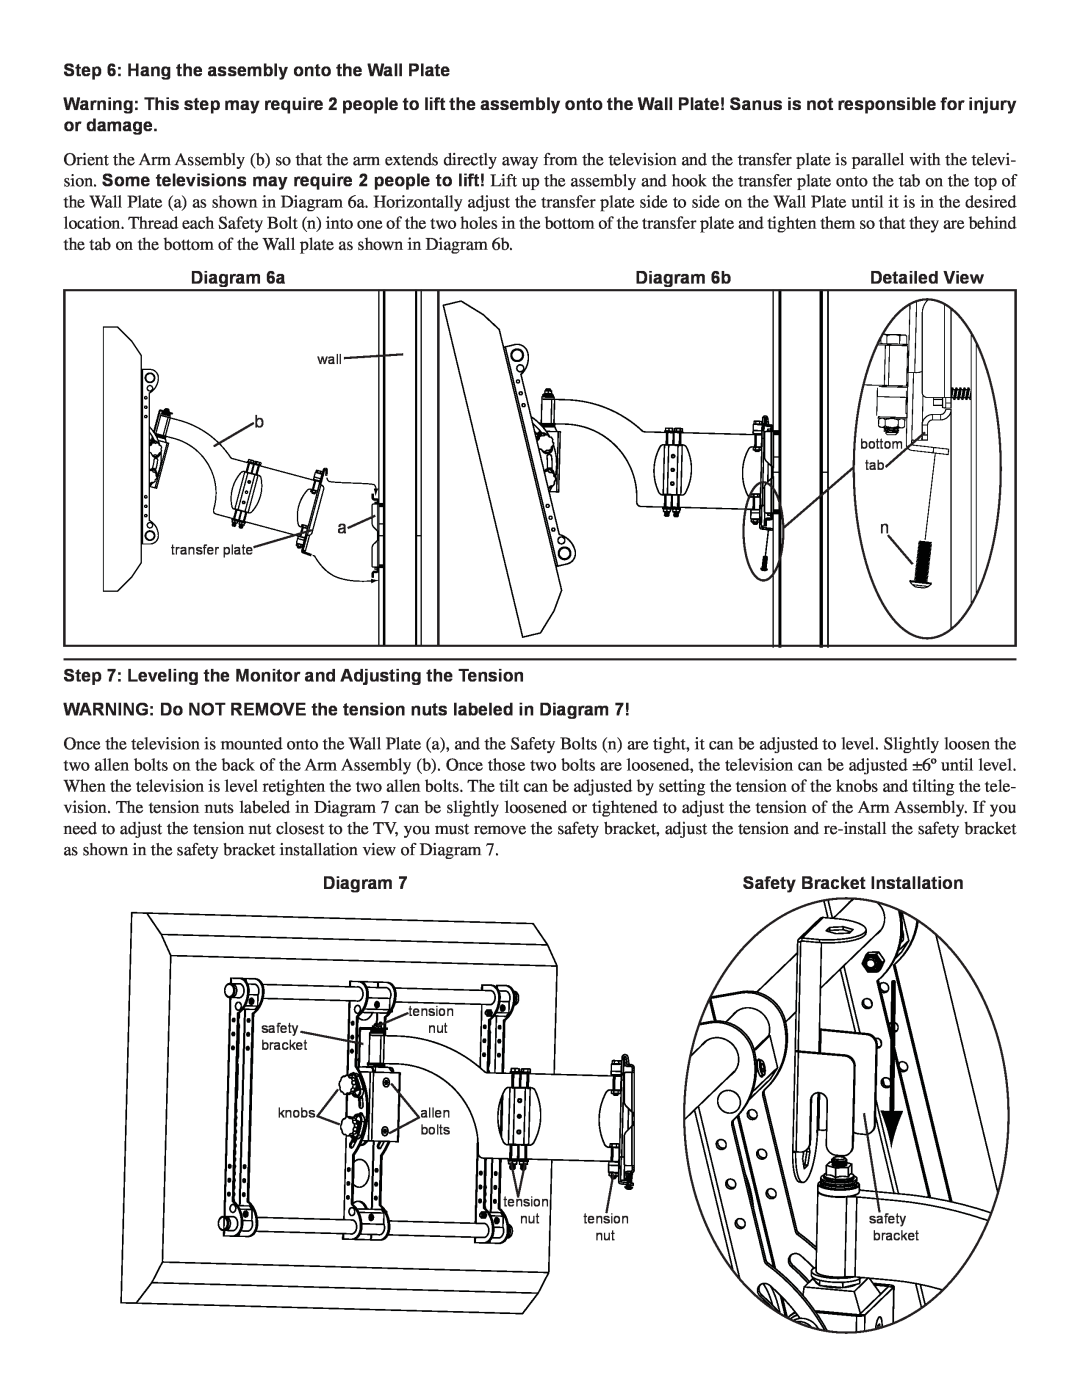 Sanus Systems VMAA18 manual Hang the assembly onto the Wall Plate, Diagram 6a, Diagram 6b, Safety Bracket Installation 